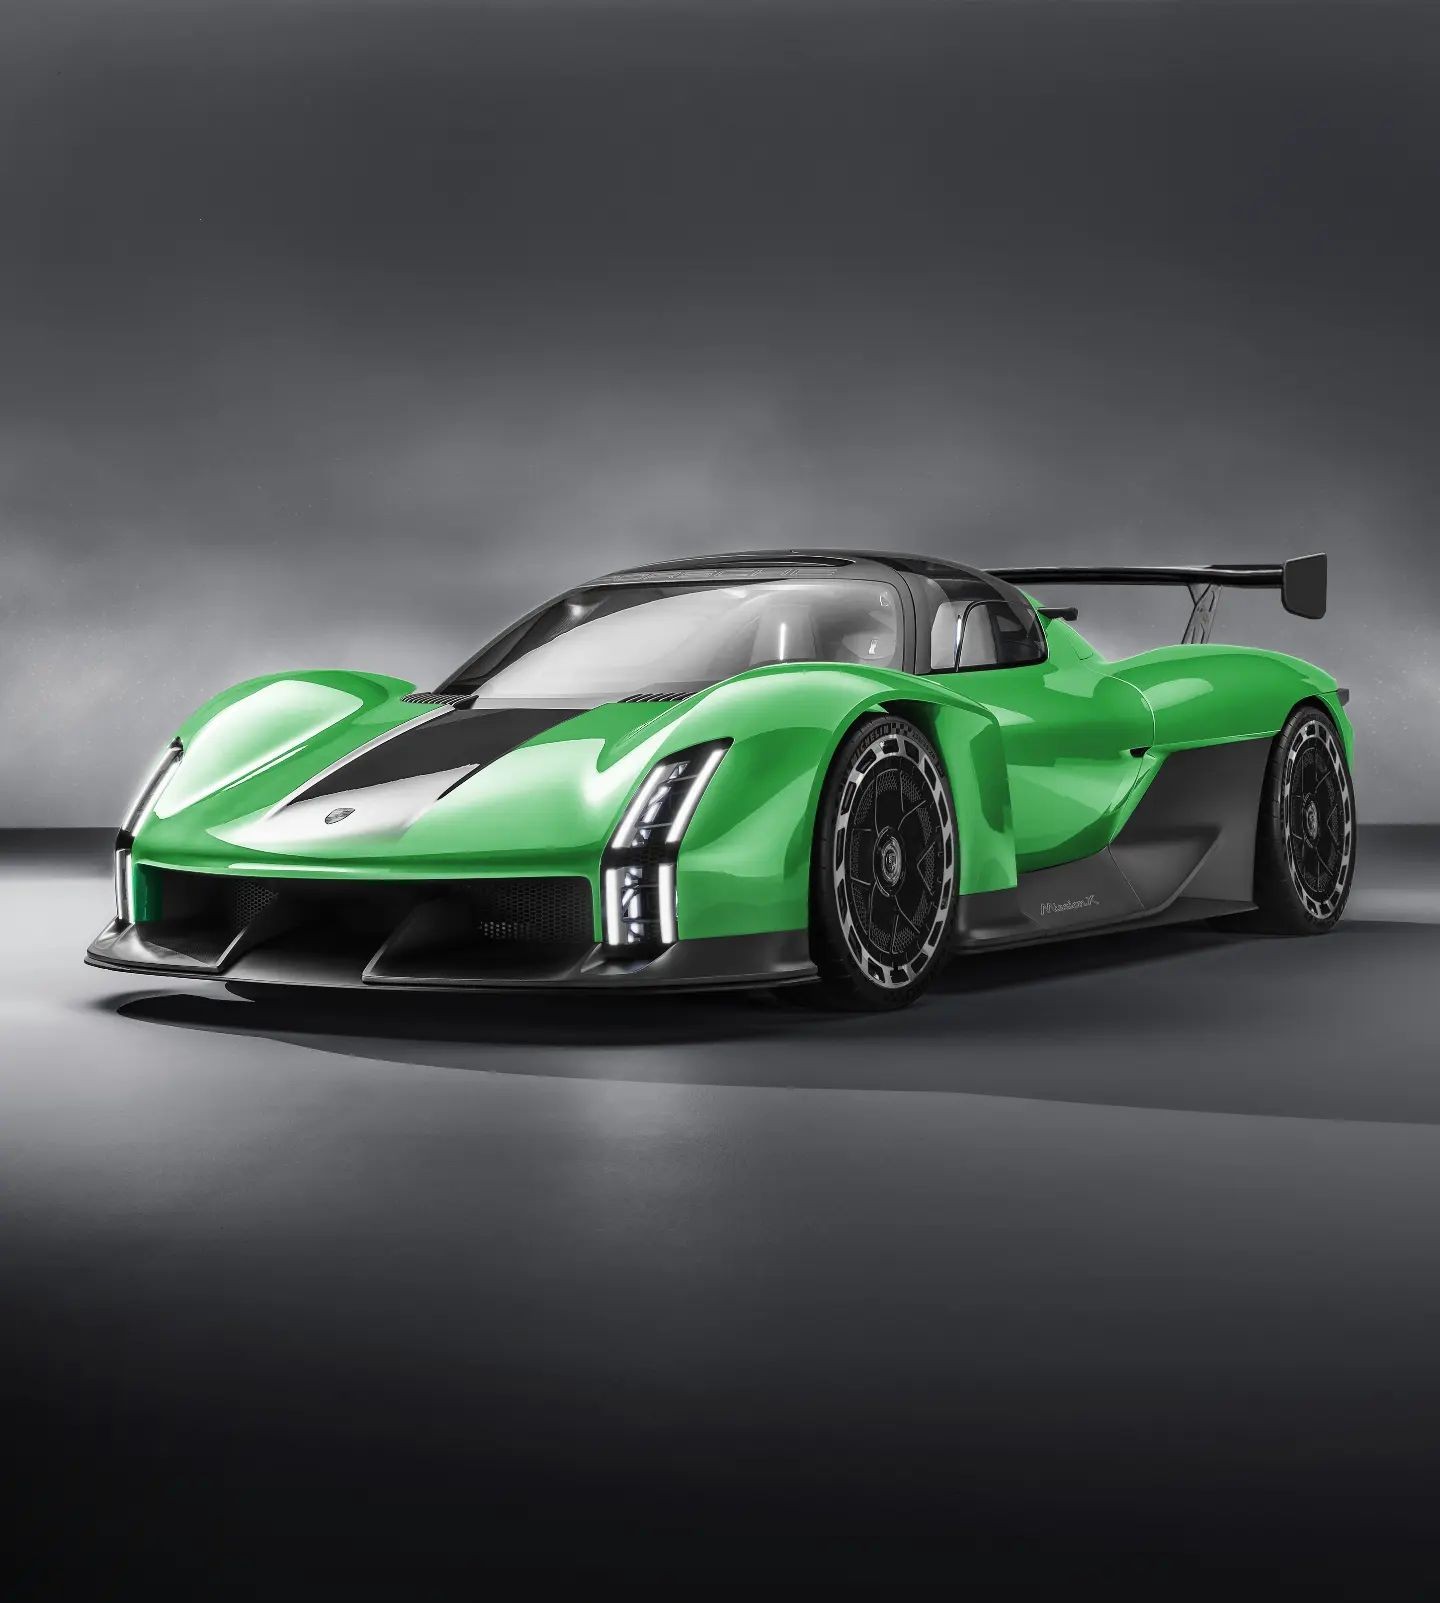 https://s1.cdn.autoevolution.com/images/news/would-the-porsche-mission-x-look-even-better-in-green-and-with-aftermarket-wheels-216298_1.jpg